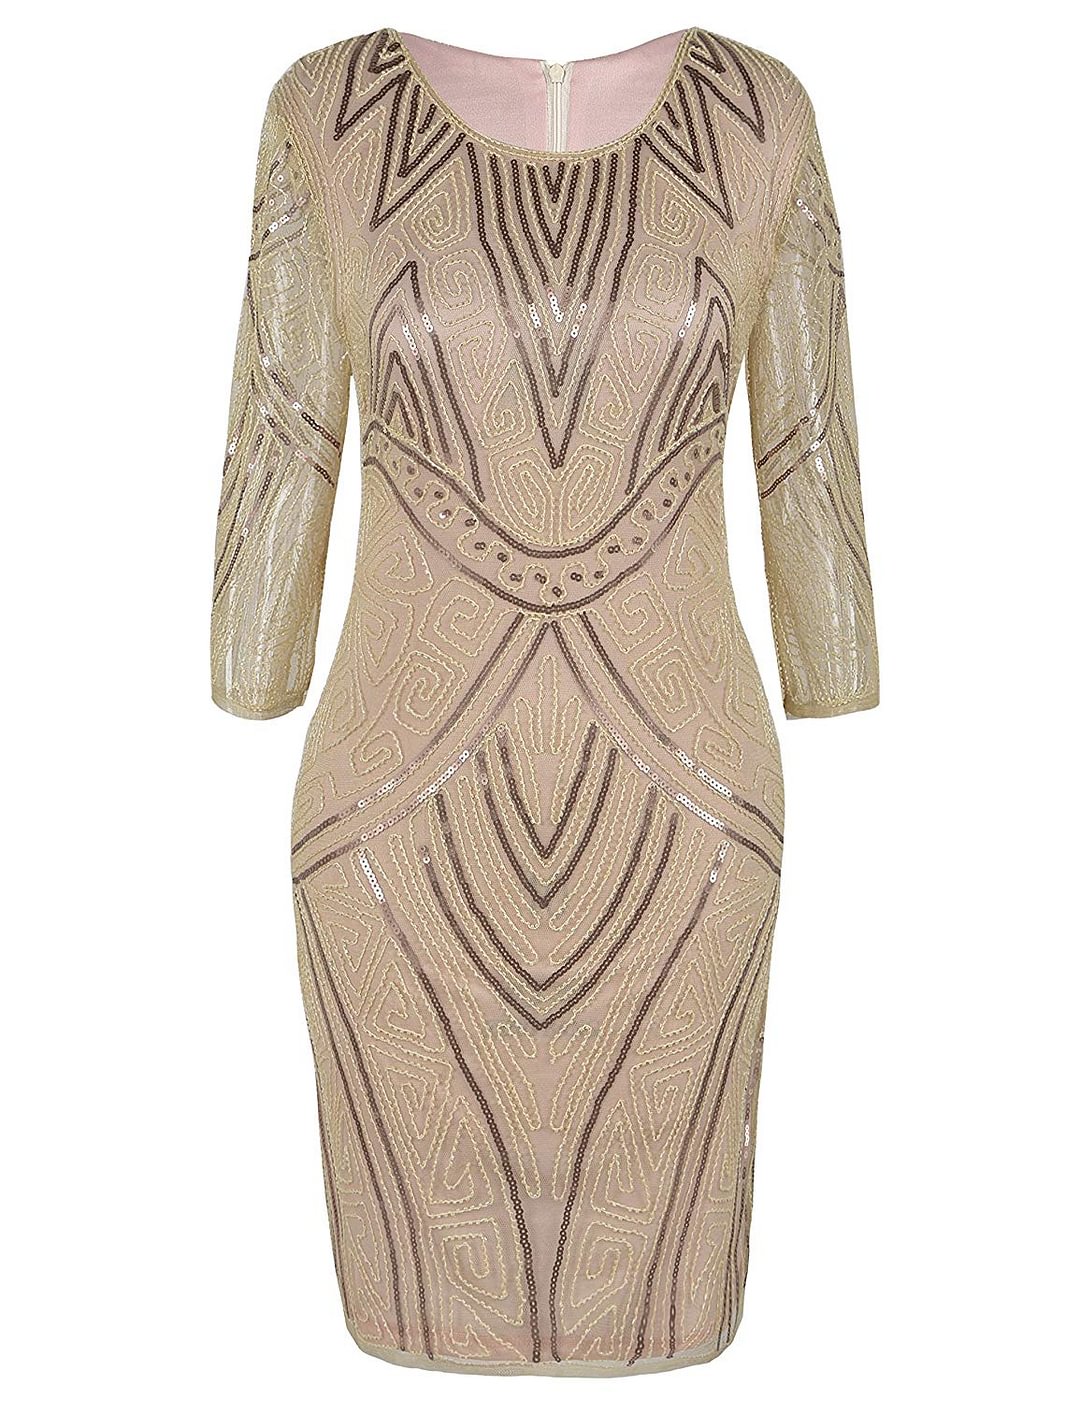 Women 1920s Flapper Dress Beaded Deco Long Sleeve Cocktail Gatsby Dress (Small Champagne Pink)